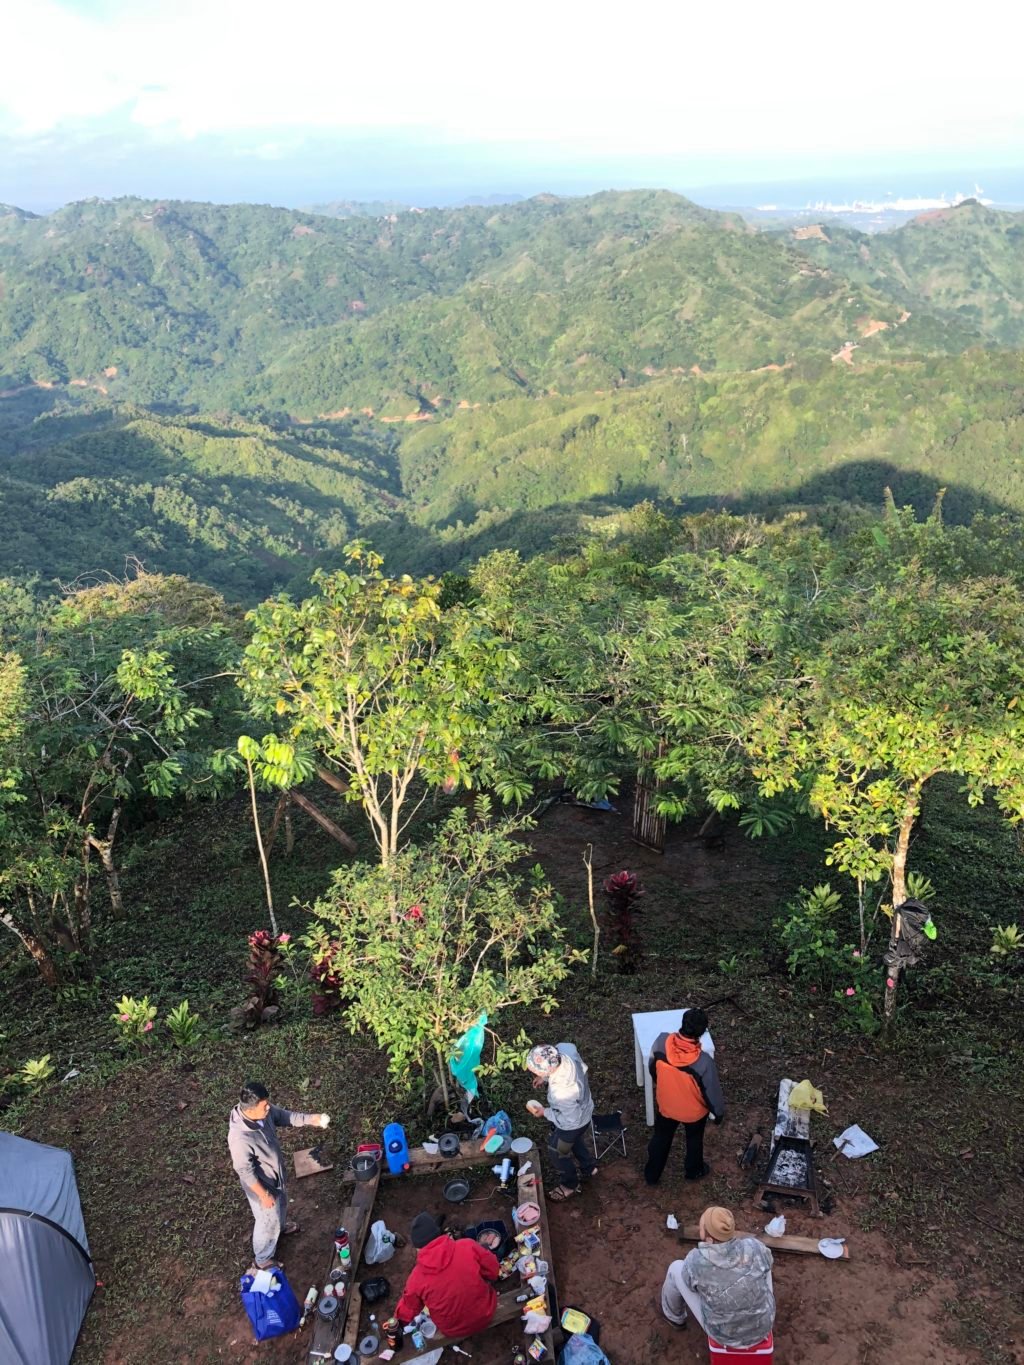 Photo of campers in Mt. Manunggal that is considered by DOT-7 as a gem destination in Cebu.